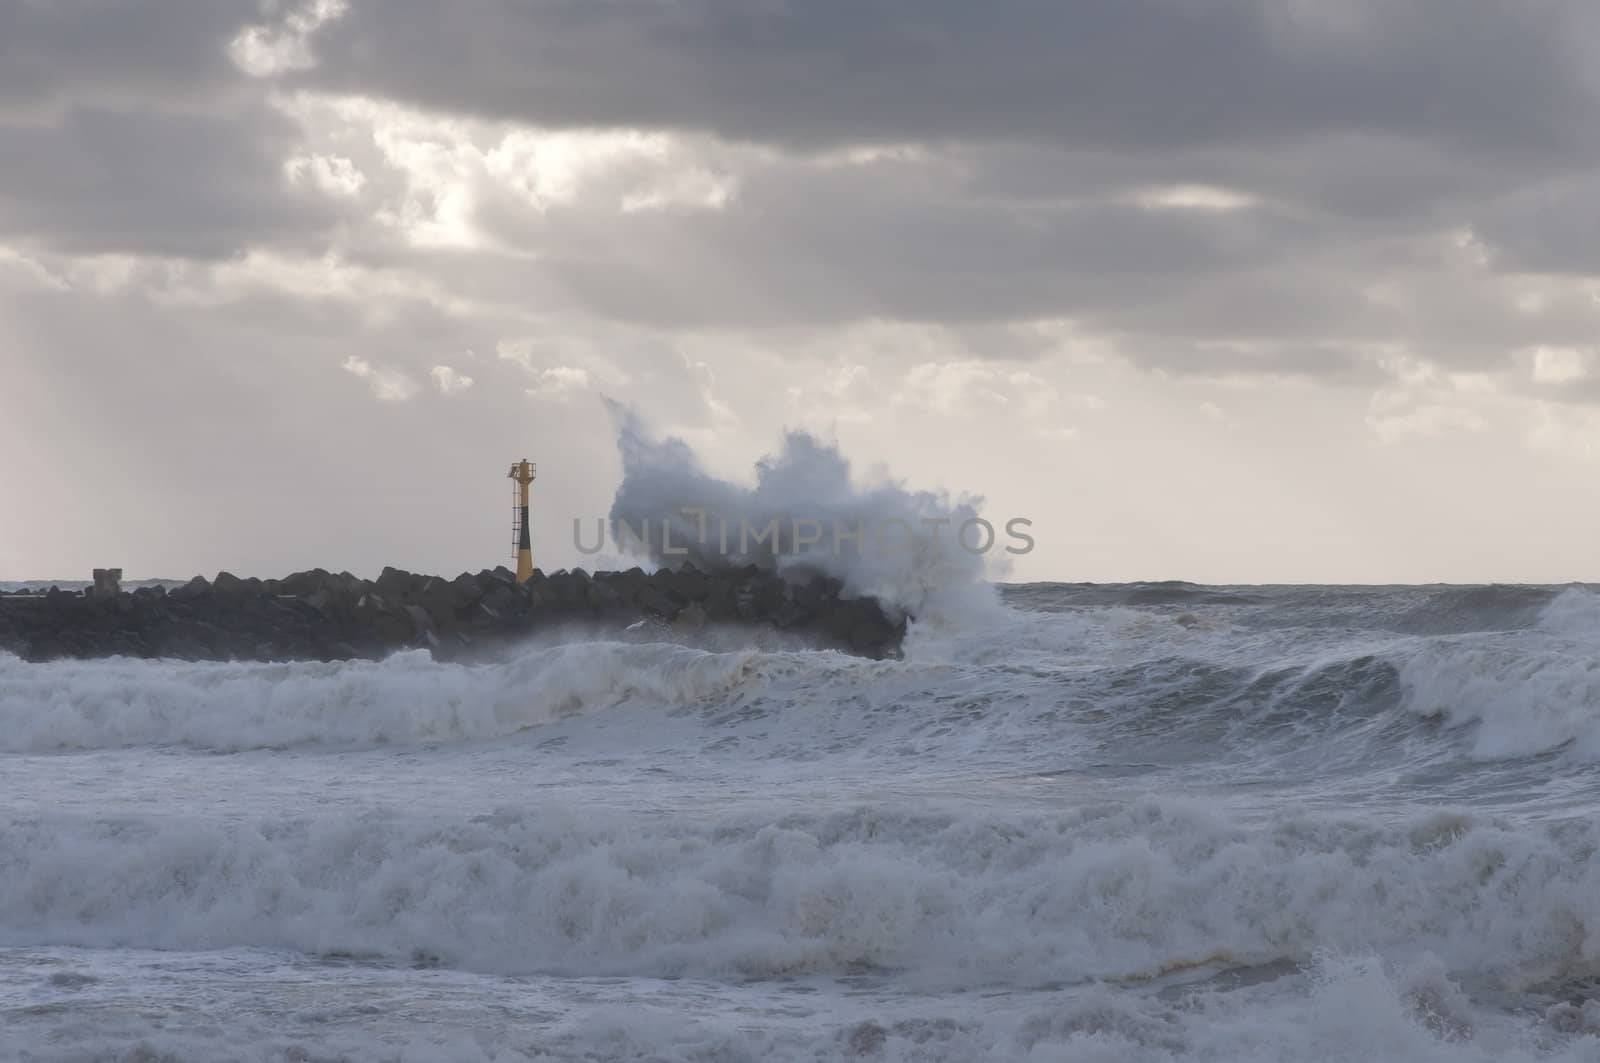 Big wave against a jetty with a little lighthouse during a stormy day